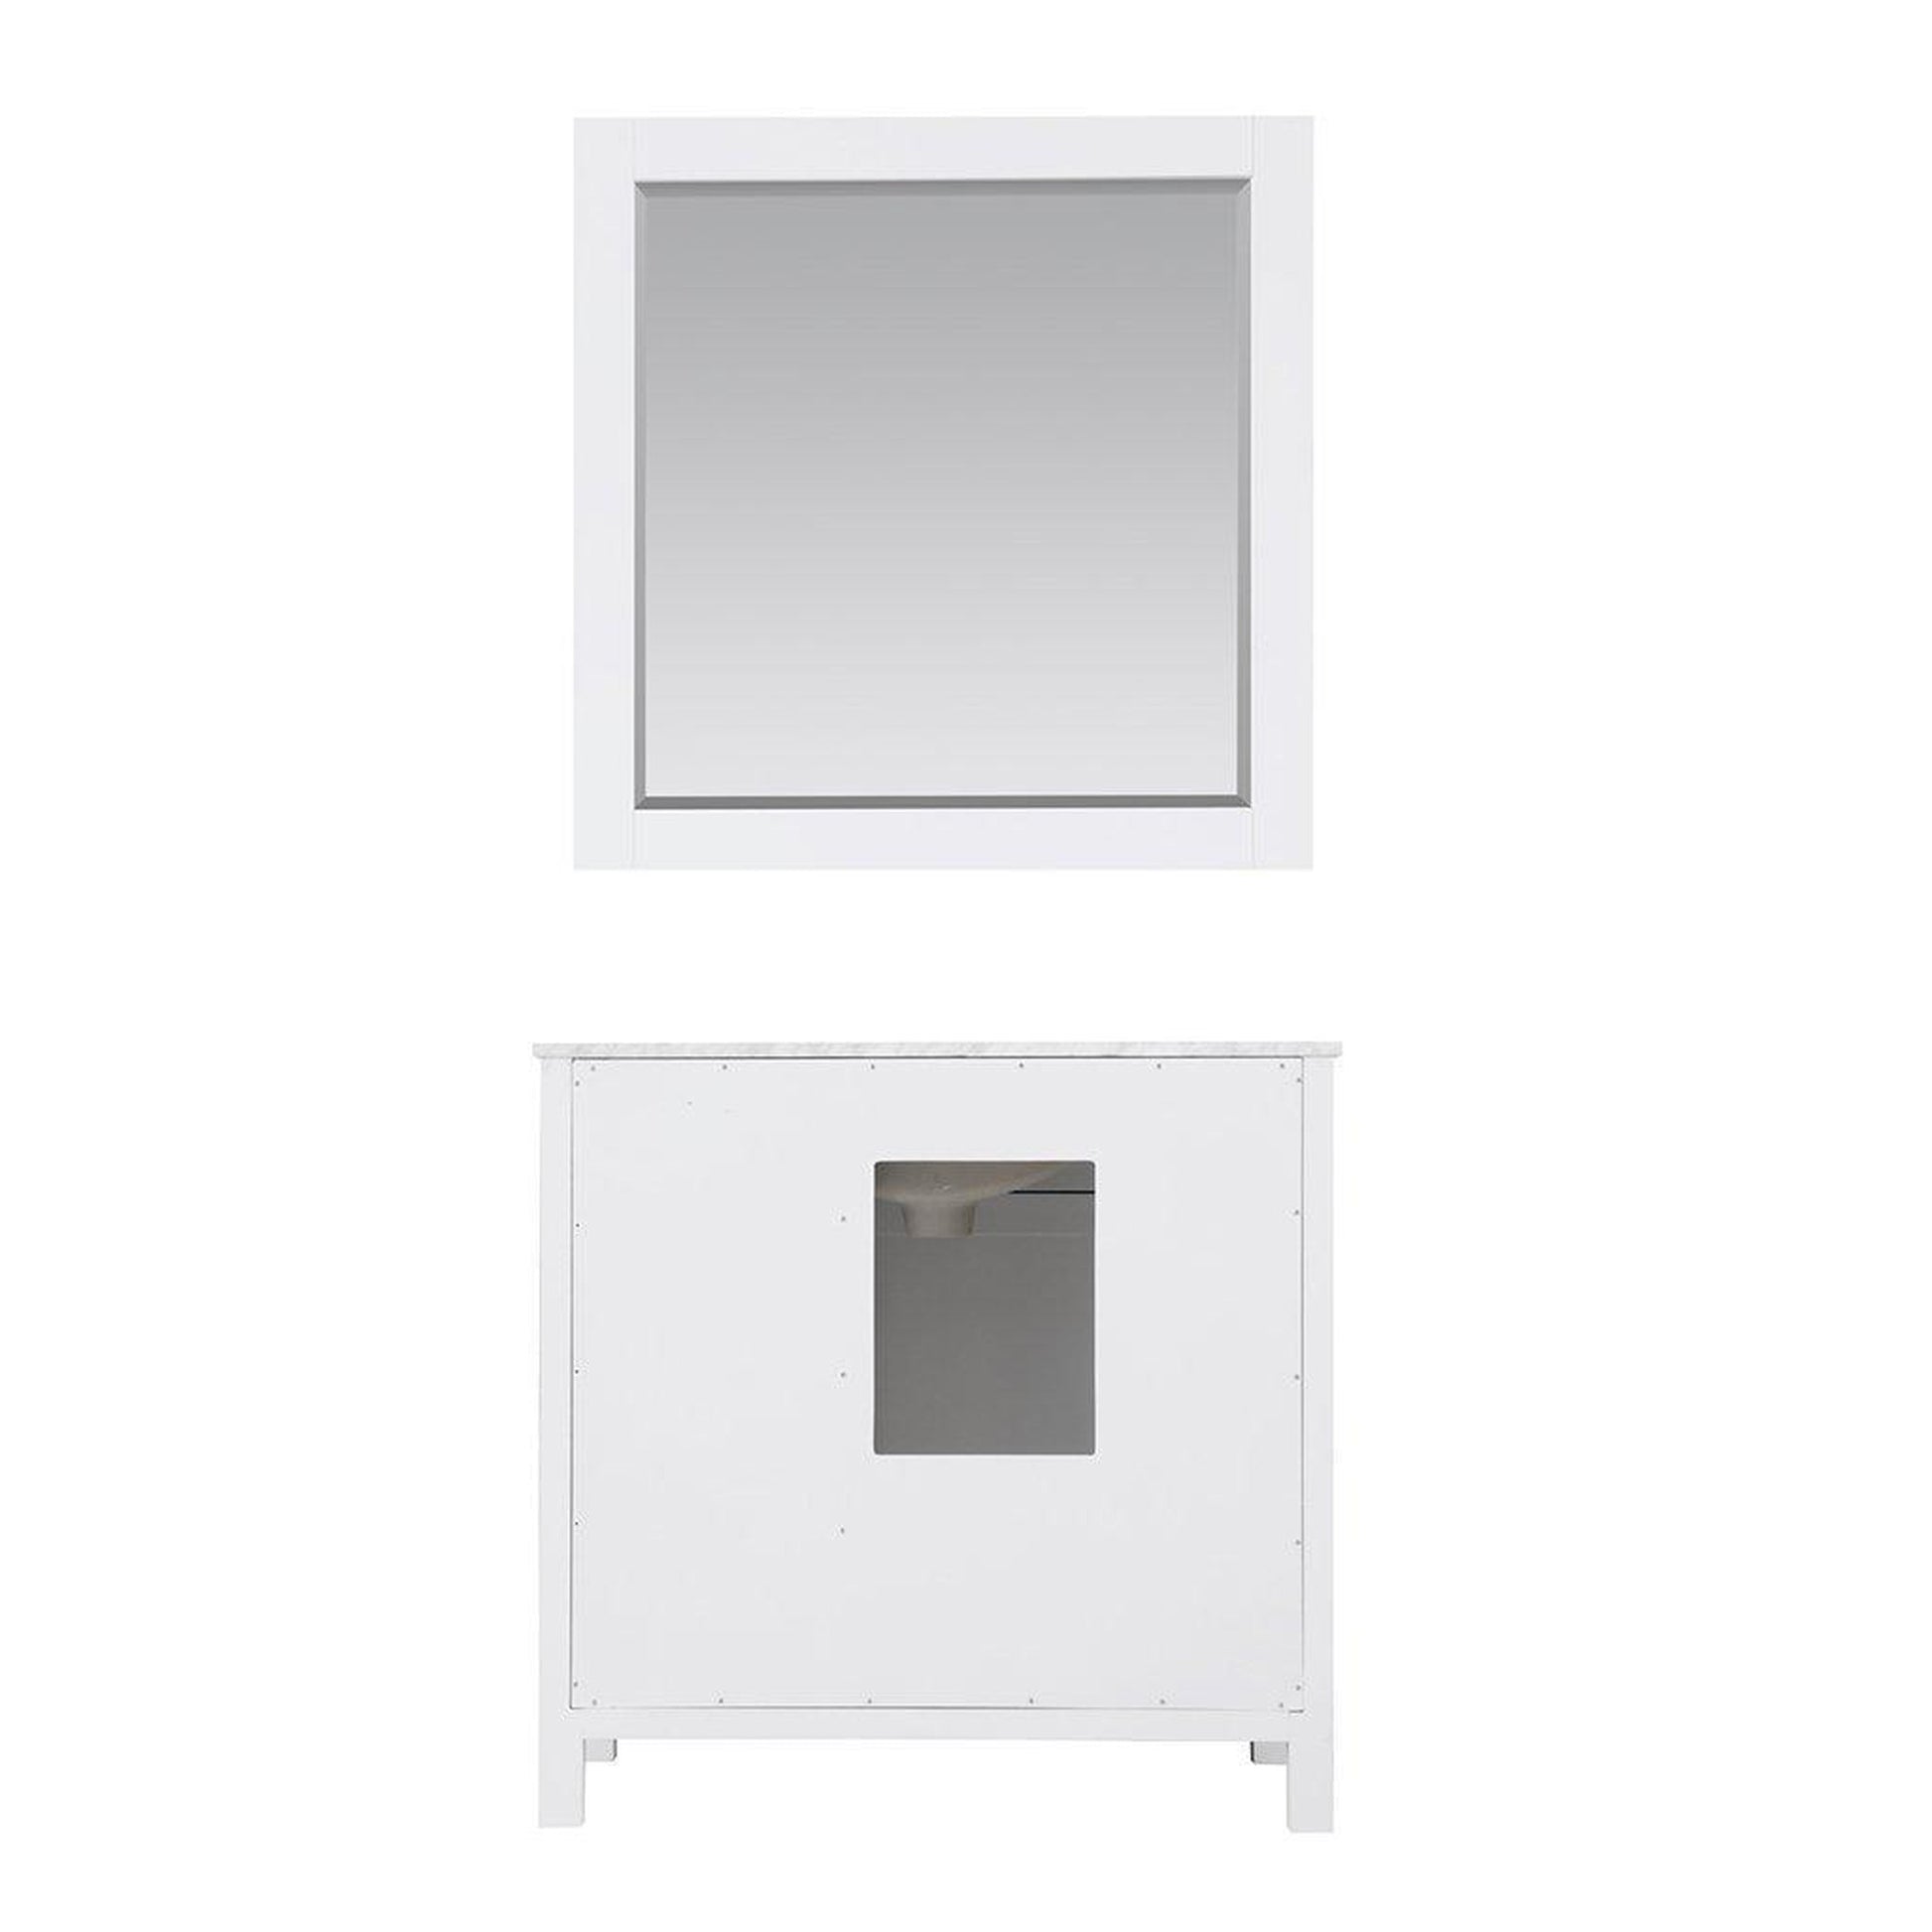 Altair Kinsley 36" Single White Freestanding Bathroom Vanity Set With Mirror, Natural Carrara White Marble Top, Rectangular Undermount Ceramic Sink, and Overflow